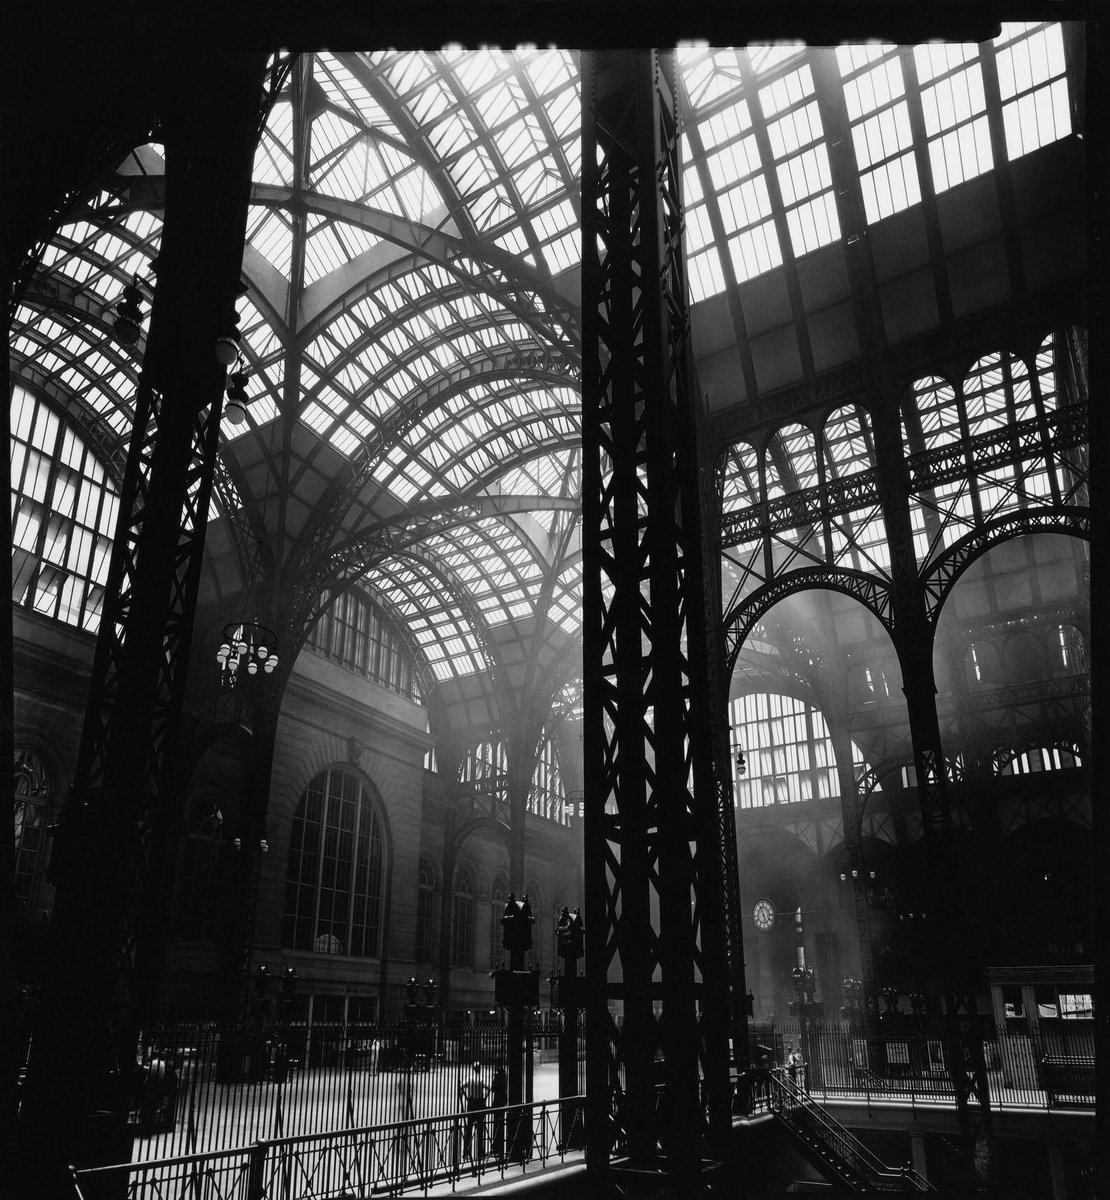 The Lens of Eternity in Sinister Wisdom: #lgbt #BereniceAbbott #amreading #writingcommunity

Since then, the station was almost all underground and it was remarkably unattractive. Berenice called its remodeling a “wicked” act.

tealeavesamemoir.wordpress.com/2024/05/12/the…